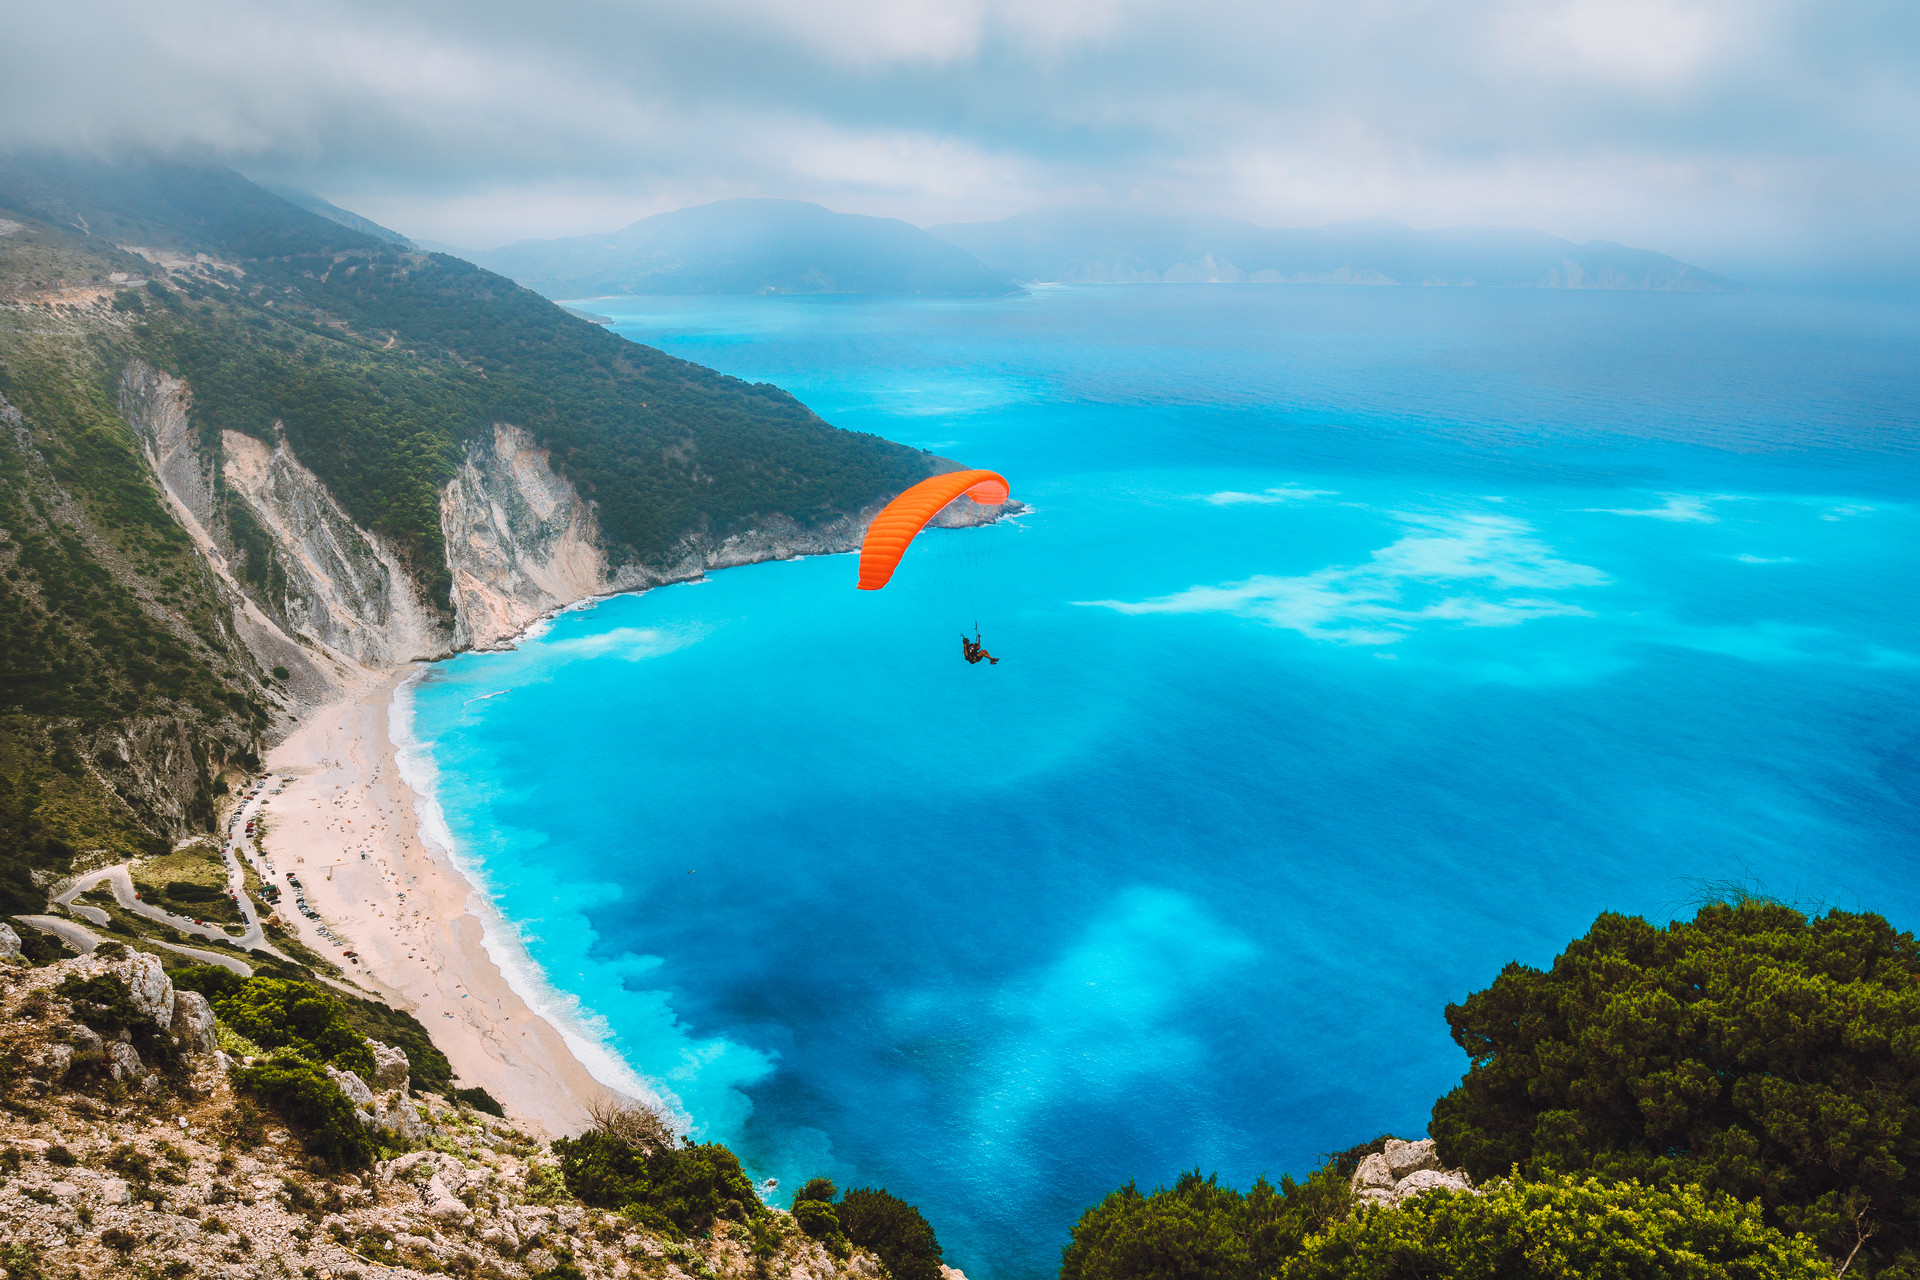 aerial-view-of-the-paraglider-flying-over-gorgeous-2021-08-26-20-17-20-utc